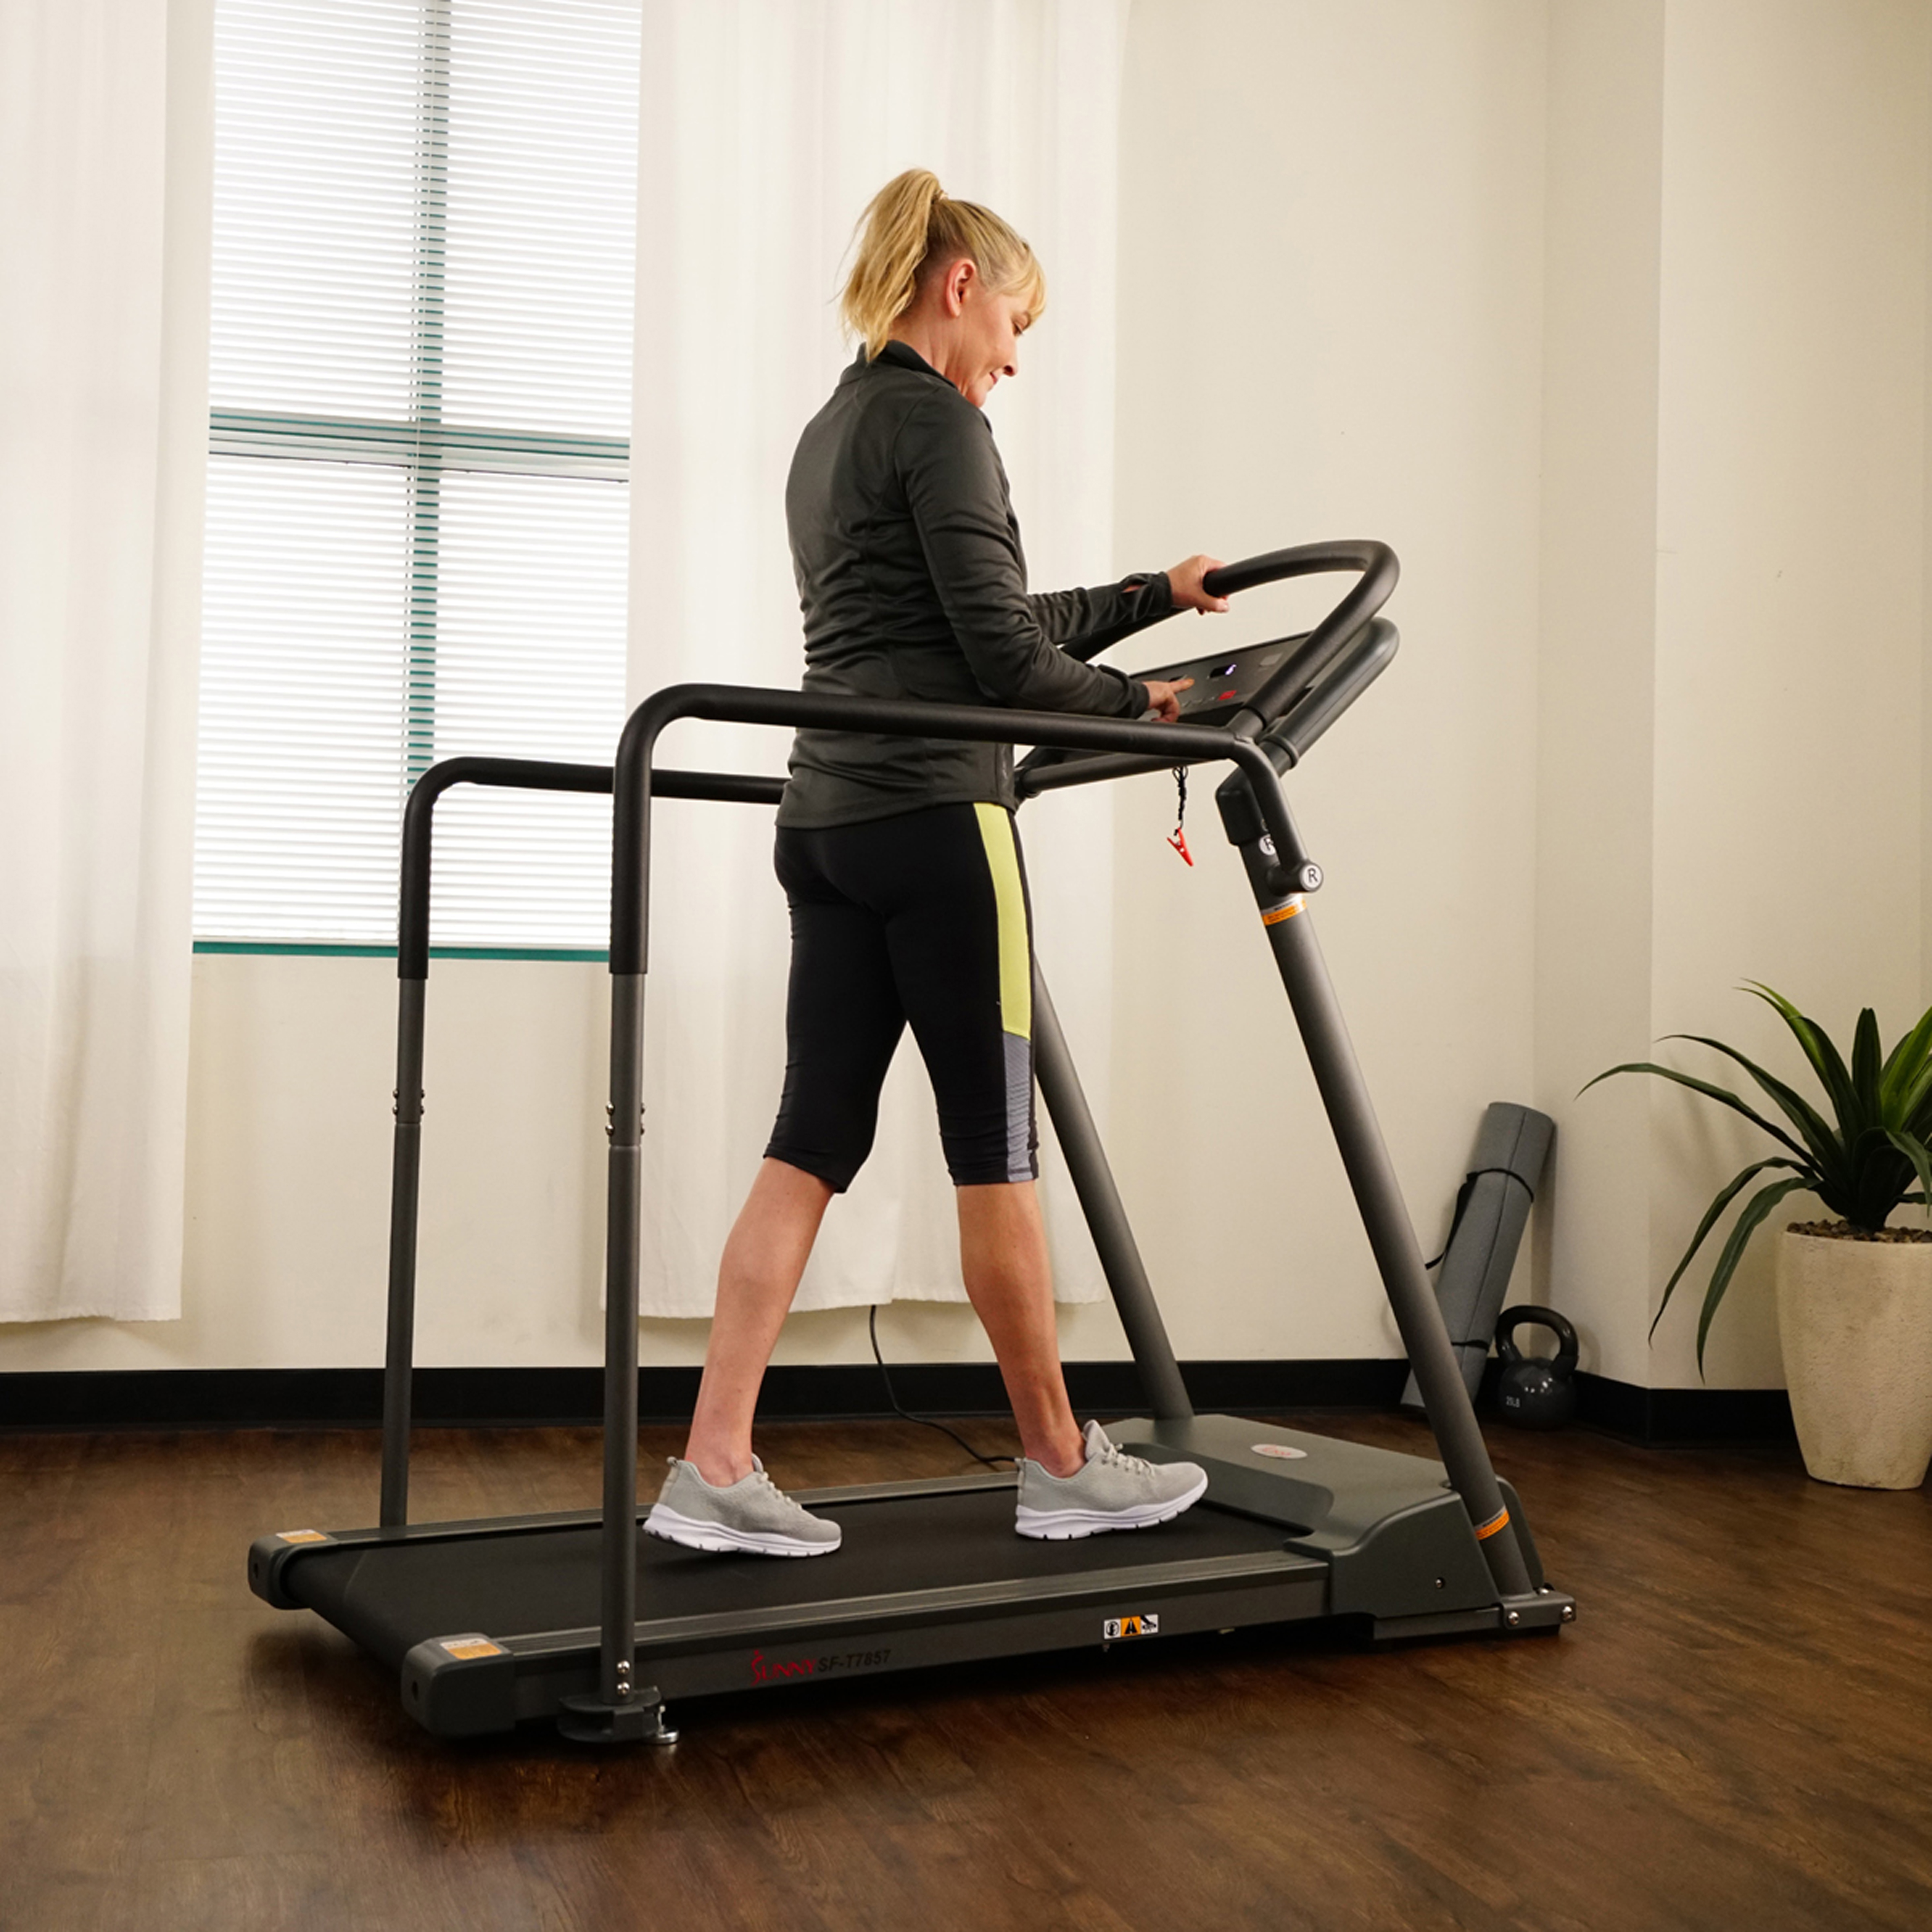 Sunny Health & Fitness Recovery Walking Pad Treadmill Machine, Low Profile Deck, Handrails for Mobility/Balance Support SF-T7857 - image 7 of 9